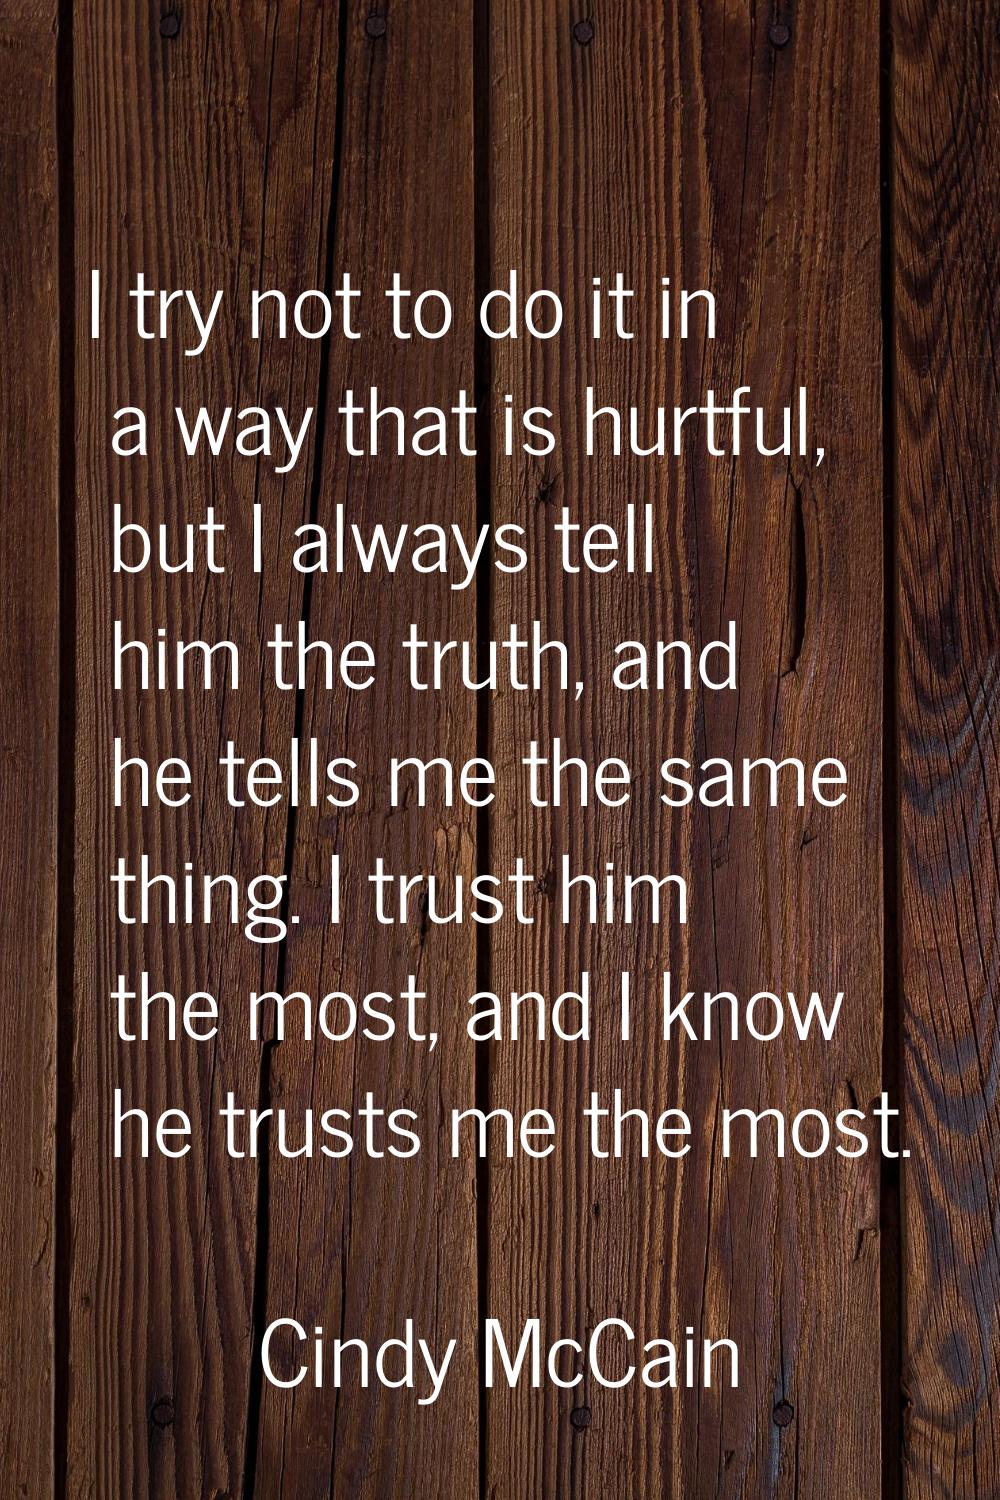 I try not to do it in a way that is hurtful, but I always tell him the truth, and he tells me the s